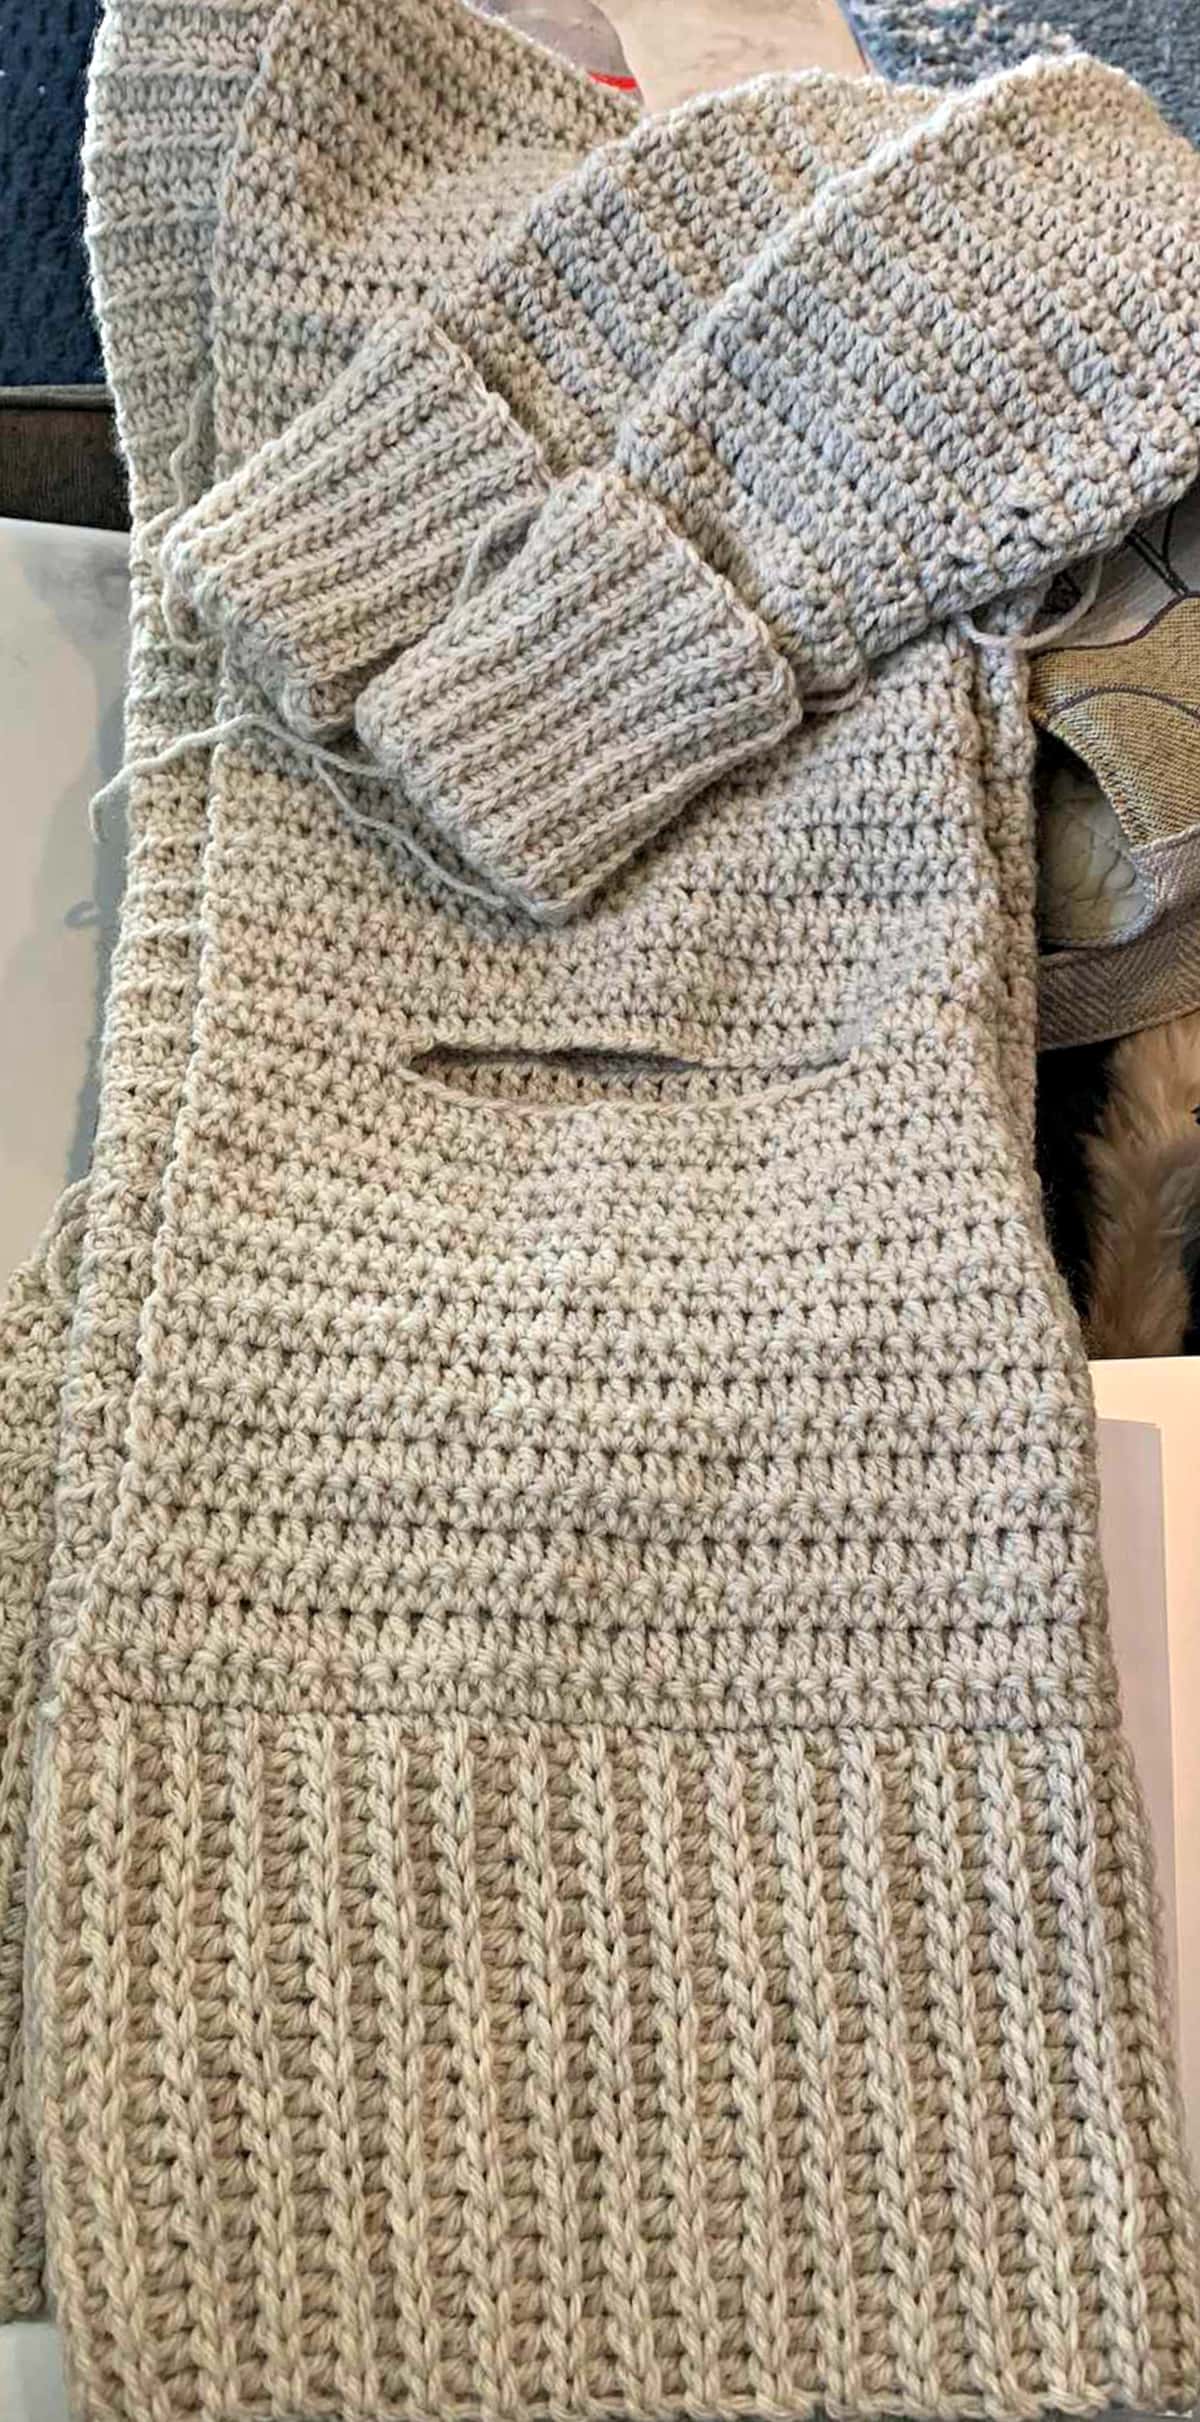 Beige crochet cardigan folded in half to show slit for pocket pouch.